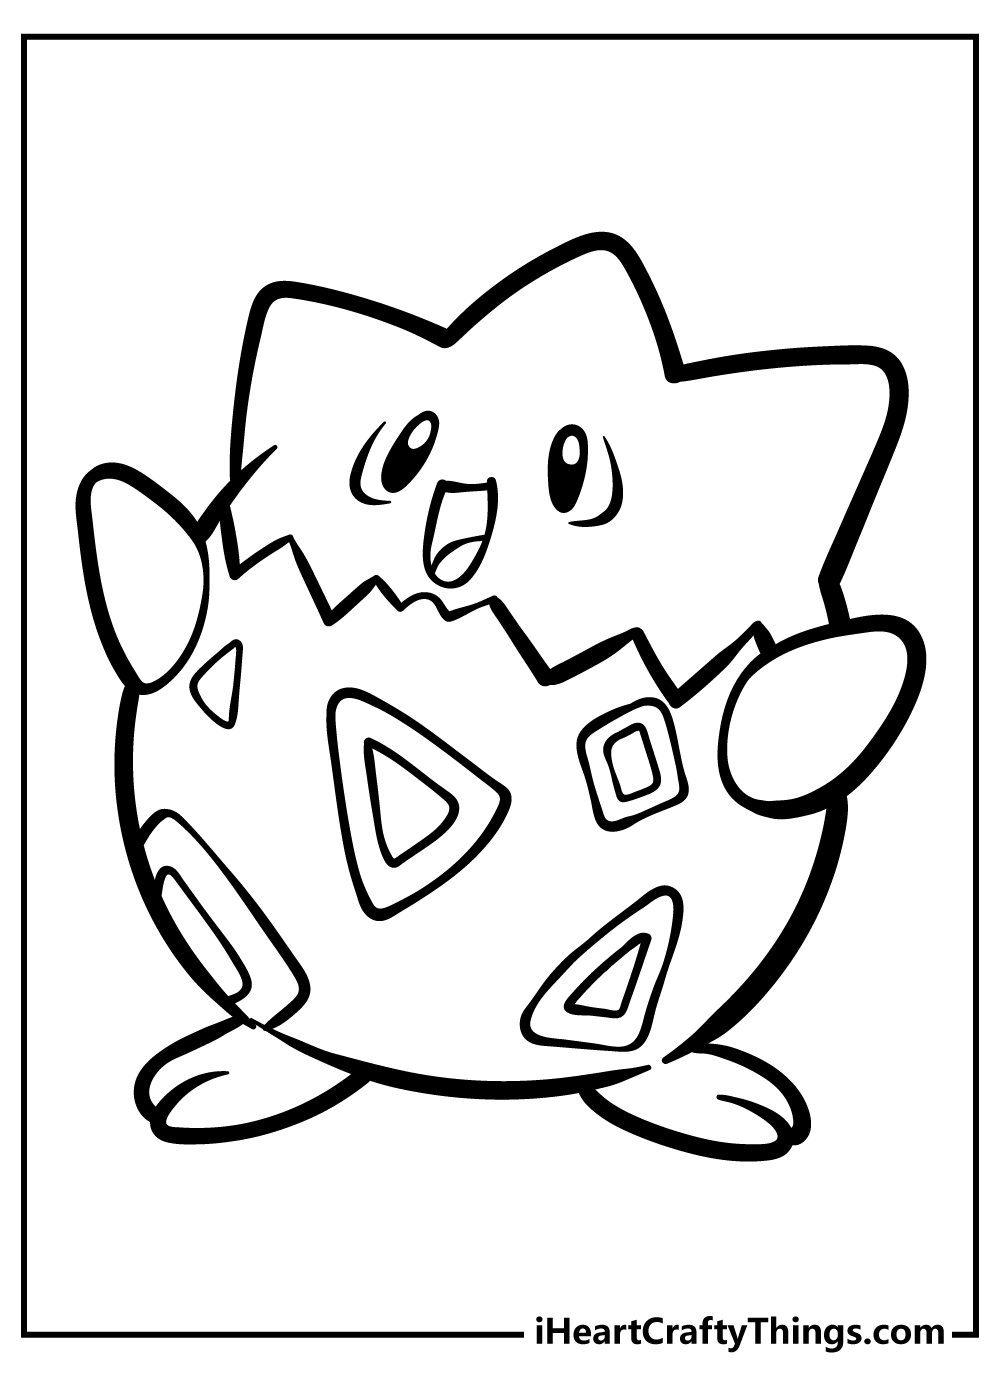 Pokemon coloring pages free printables